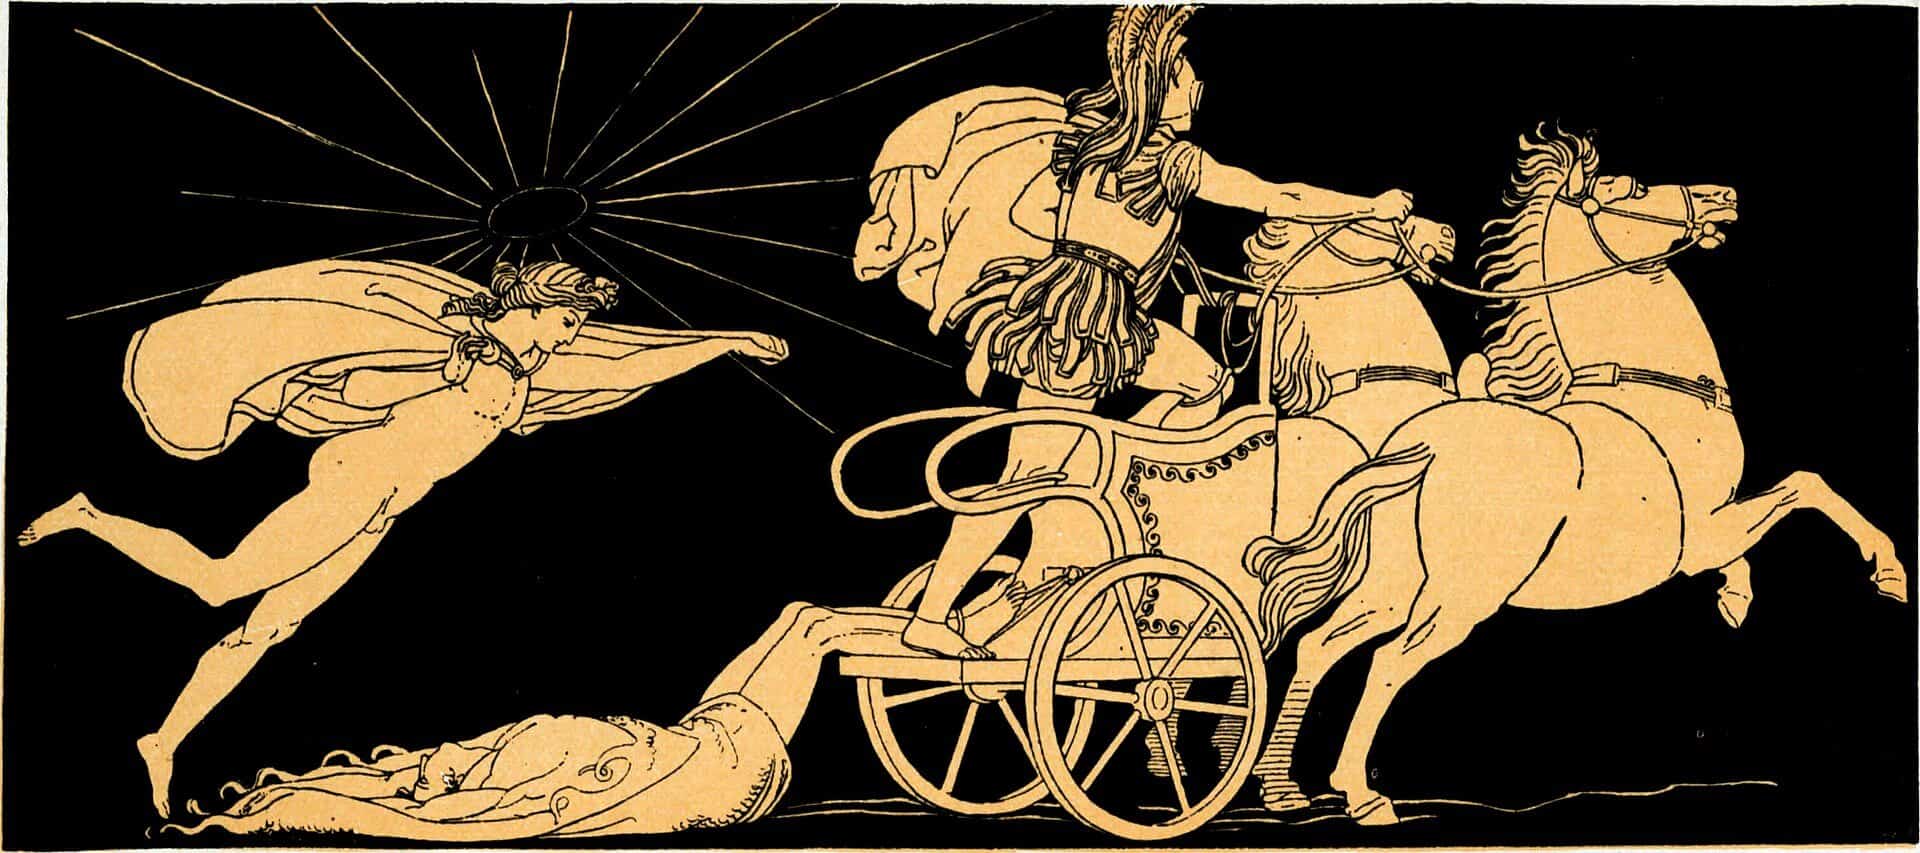 hector s body dragged at the chariot of achilles